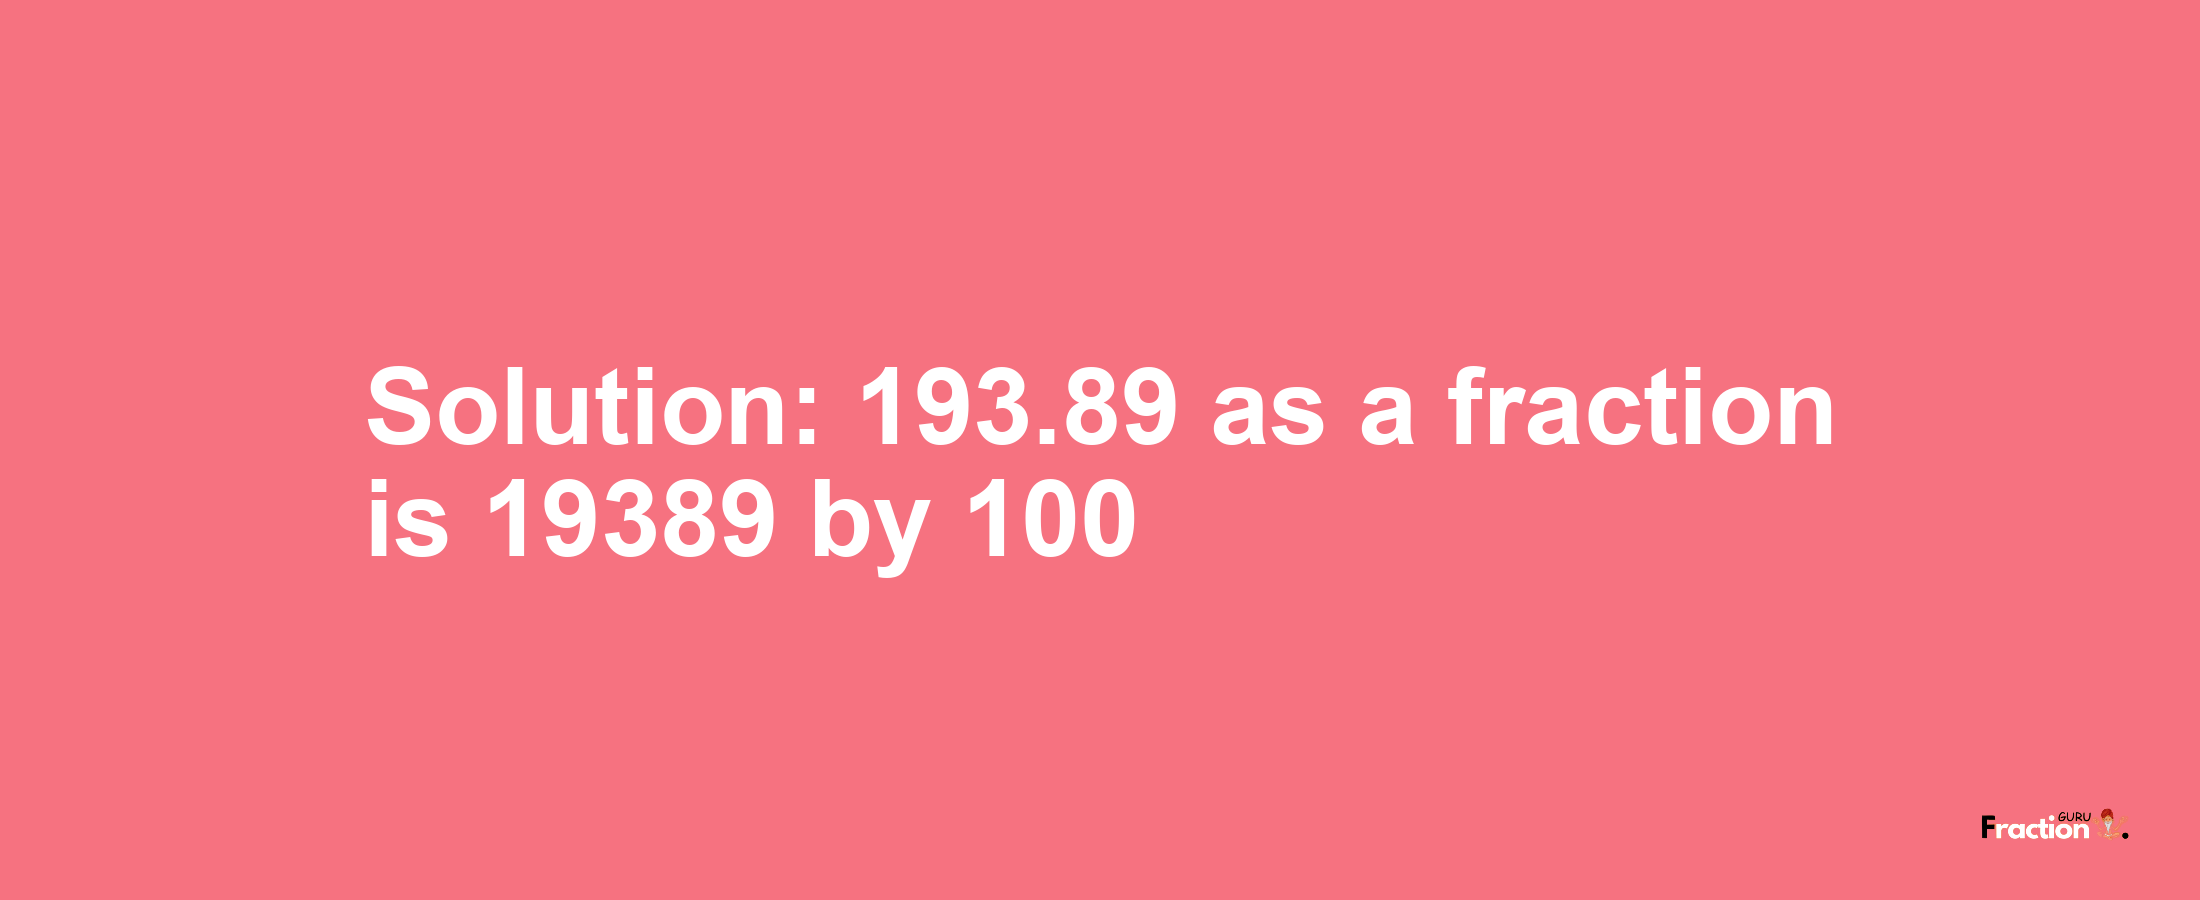 Solution:193.89 as a fraction is 19389/100